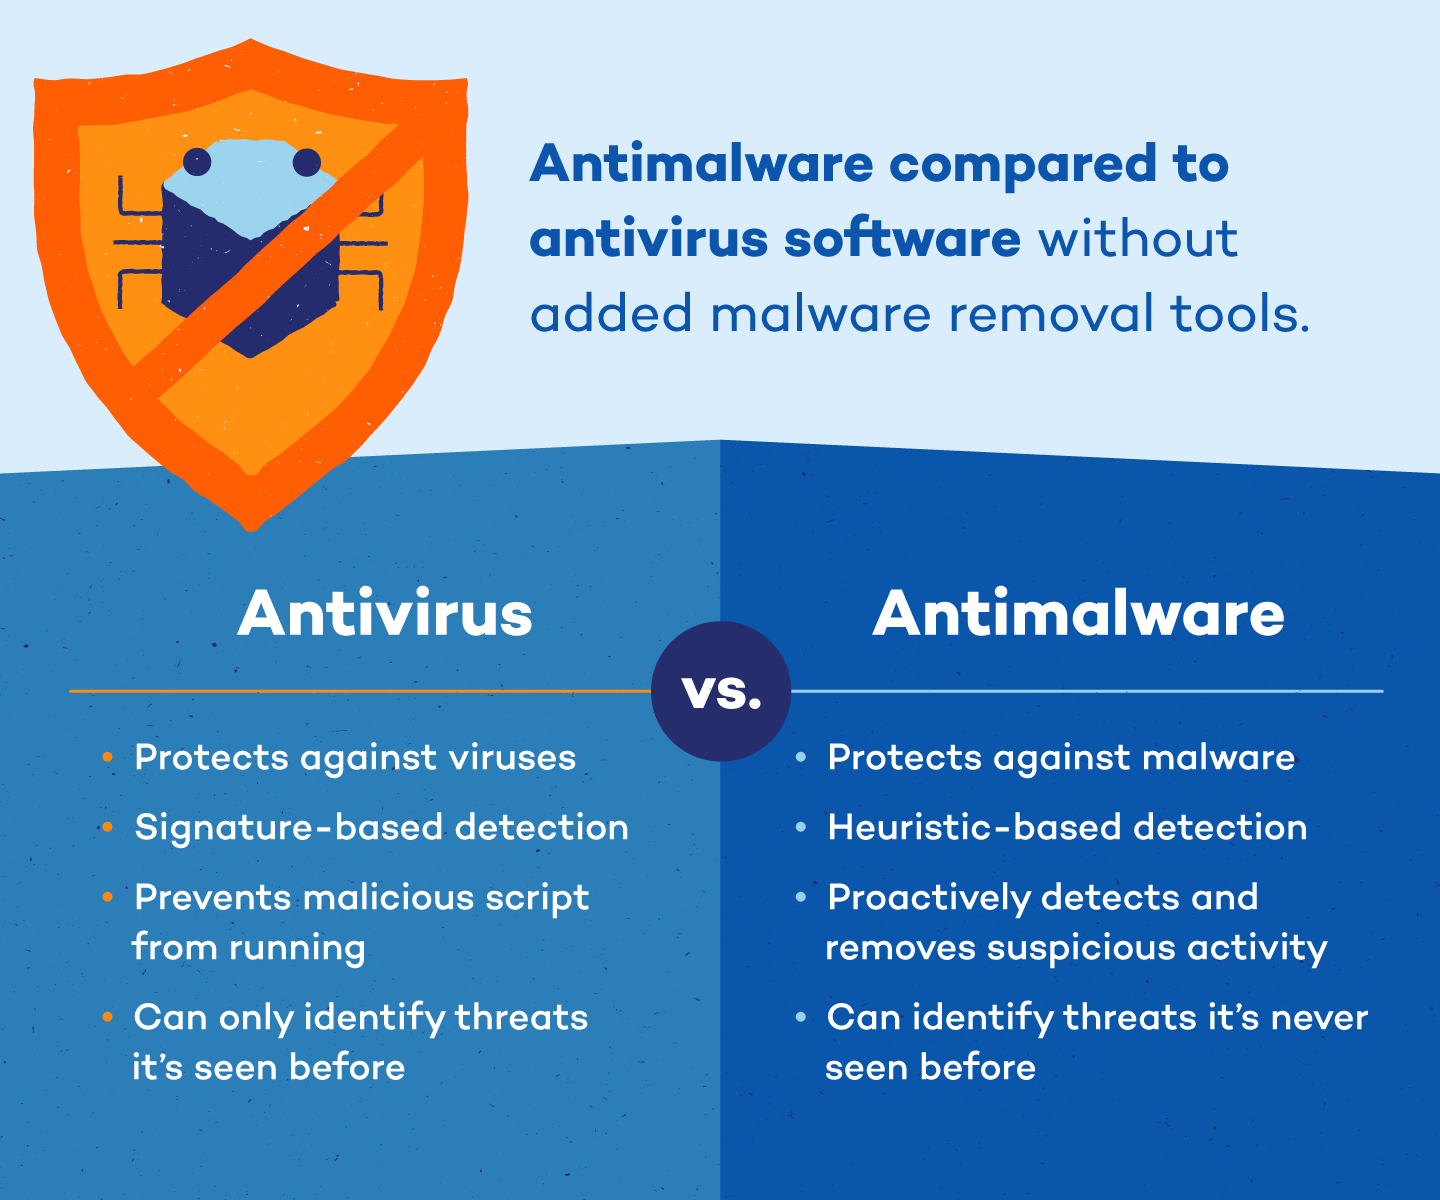 Install a reliable antivirus or anti-malware software if you don't have one.
Update the antivirus/anti-malware software with the latest definitions.